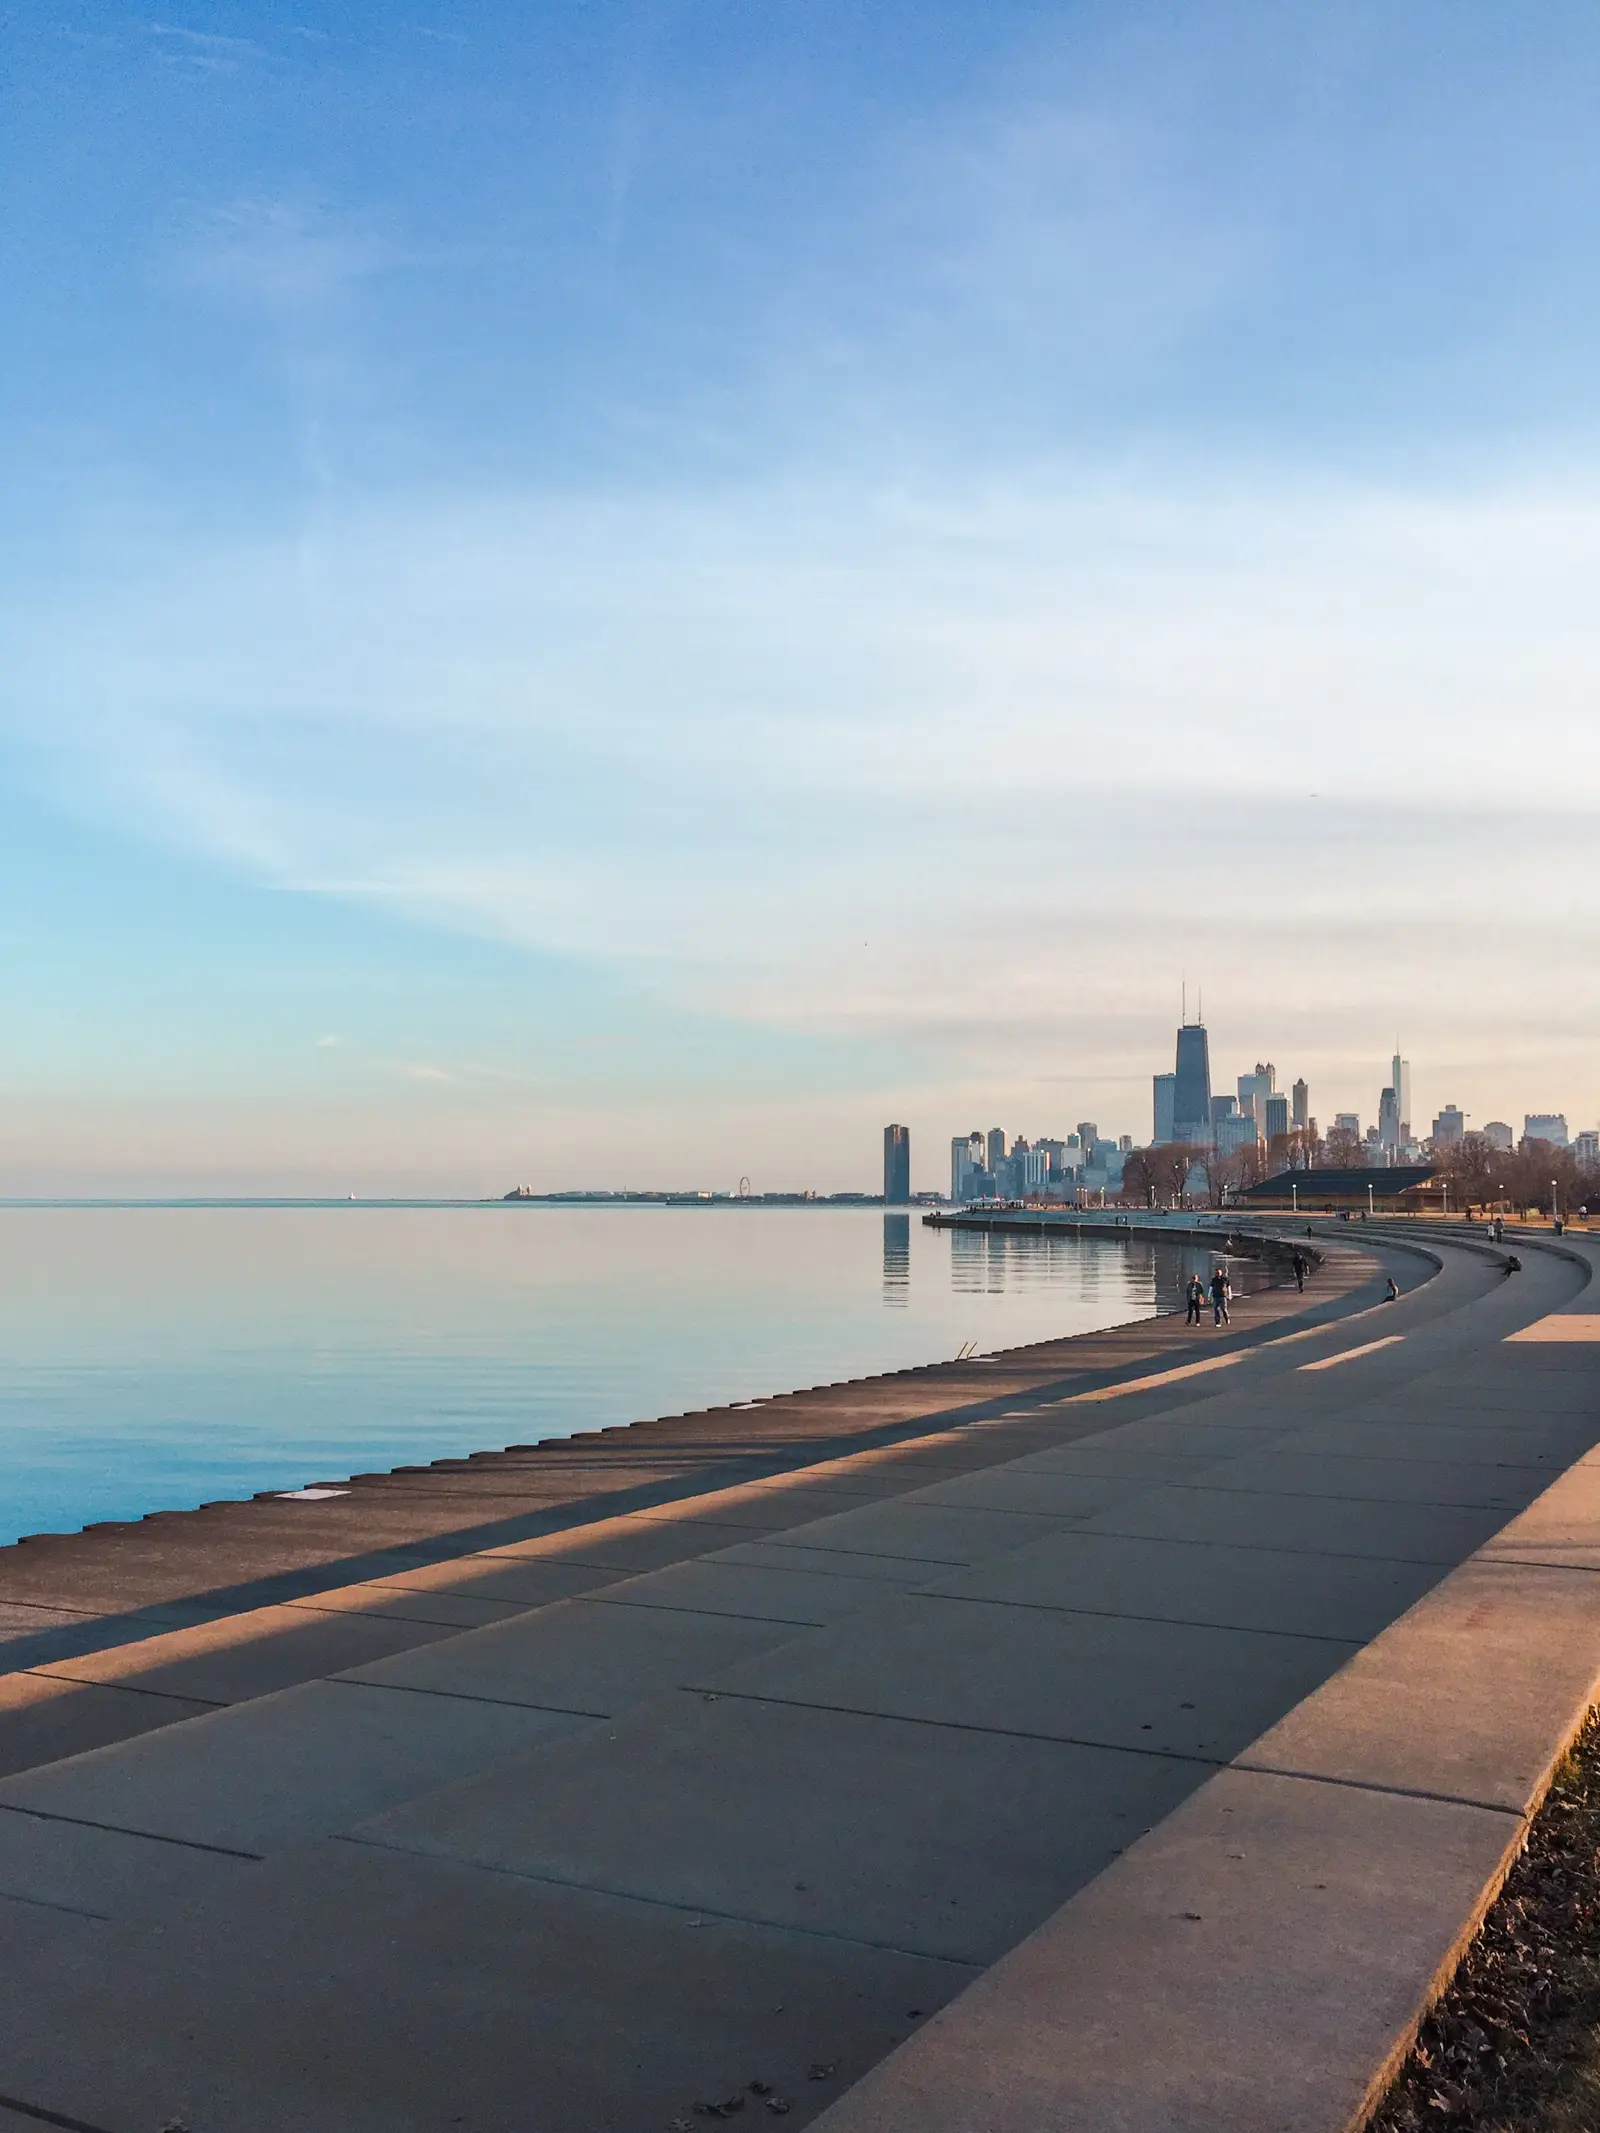 Go for a stroll on the Lakefront Trail with the skyscrapers of Downtown in the background at sunset, one of the top things to do in Chicago on a weekend.